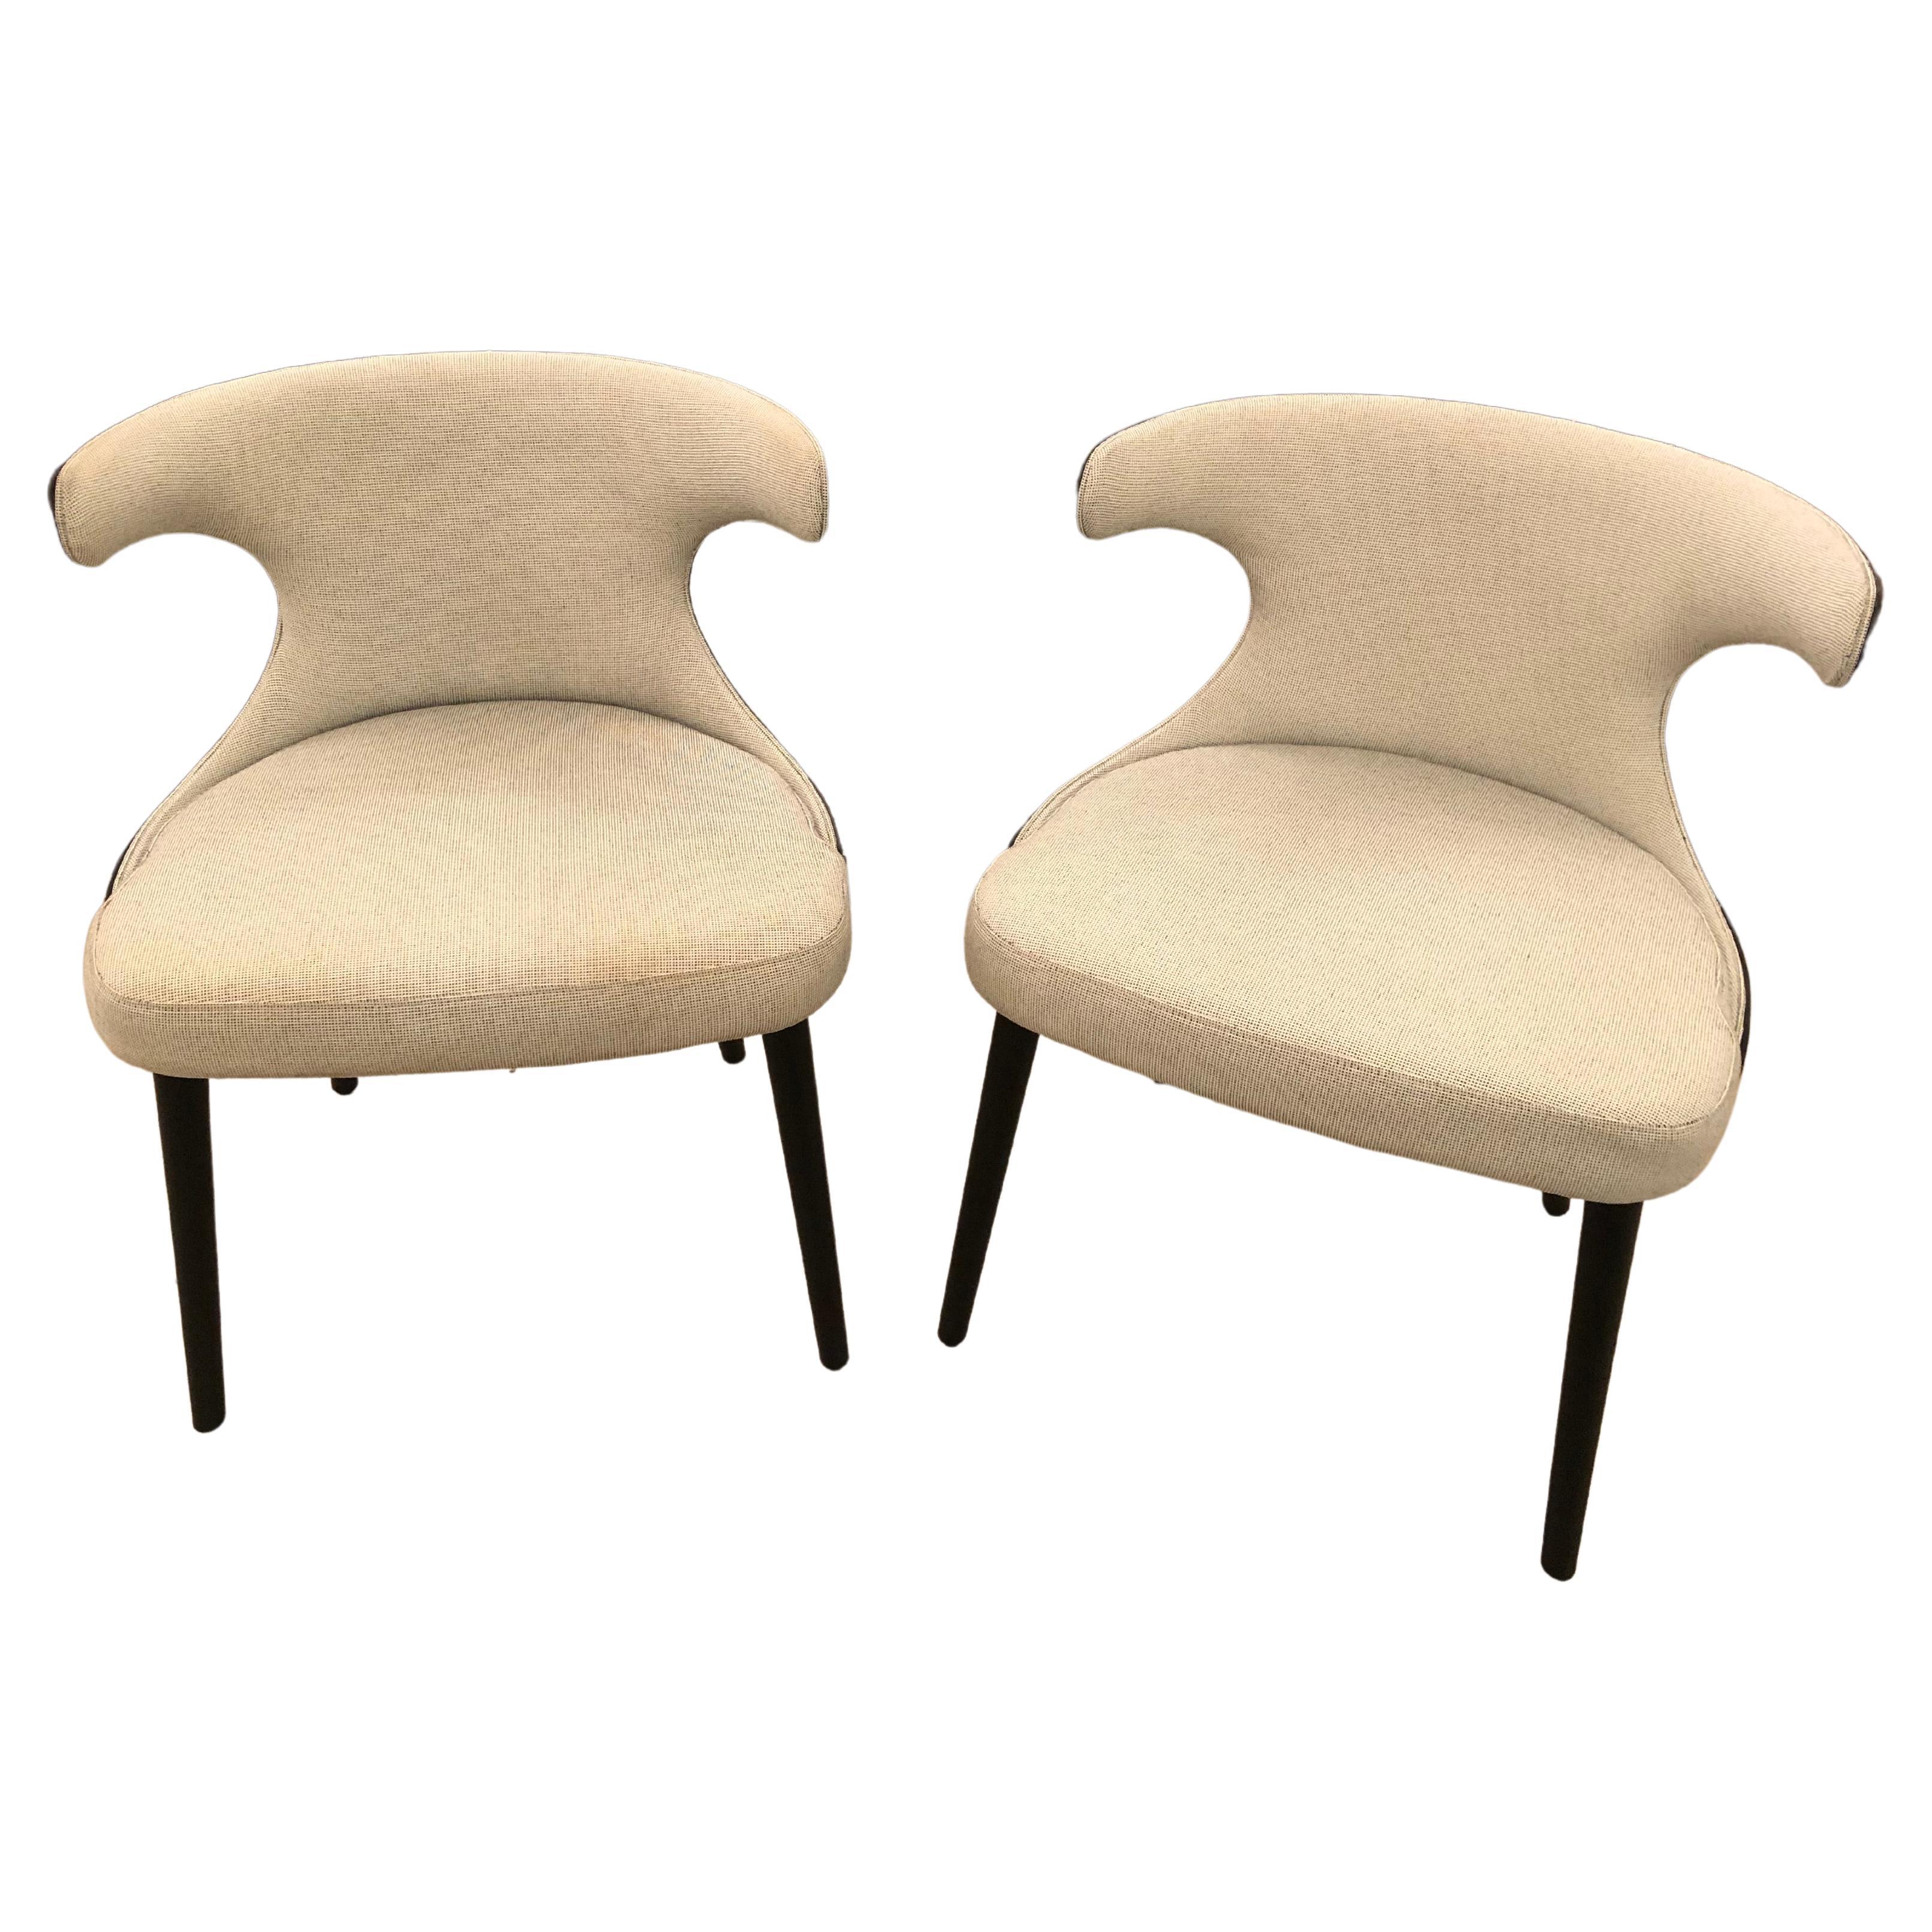 Super Chic Sculptural Pair of Italian Chairs For Sale